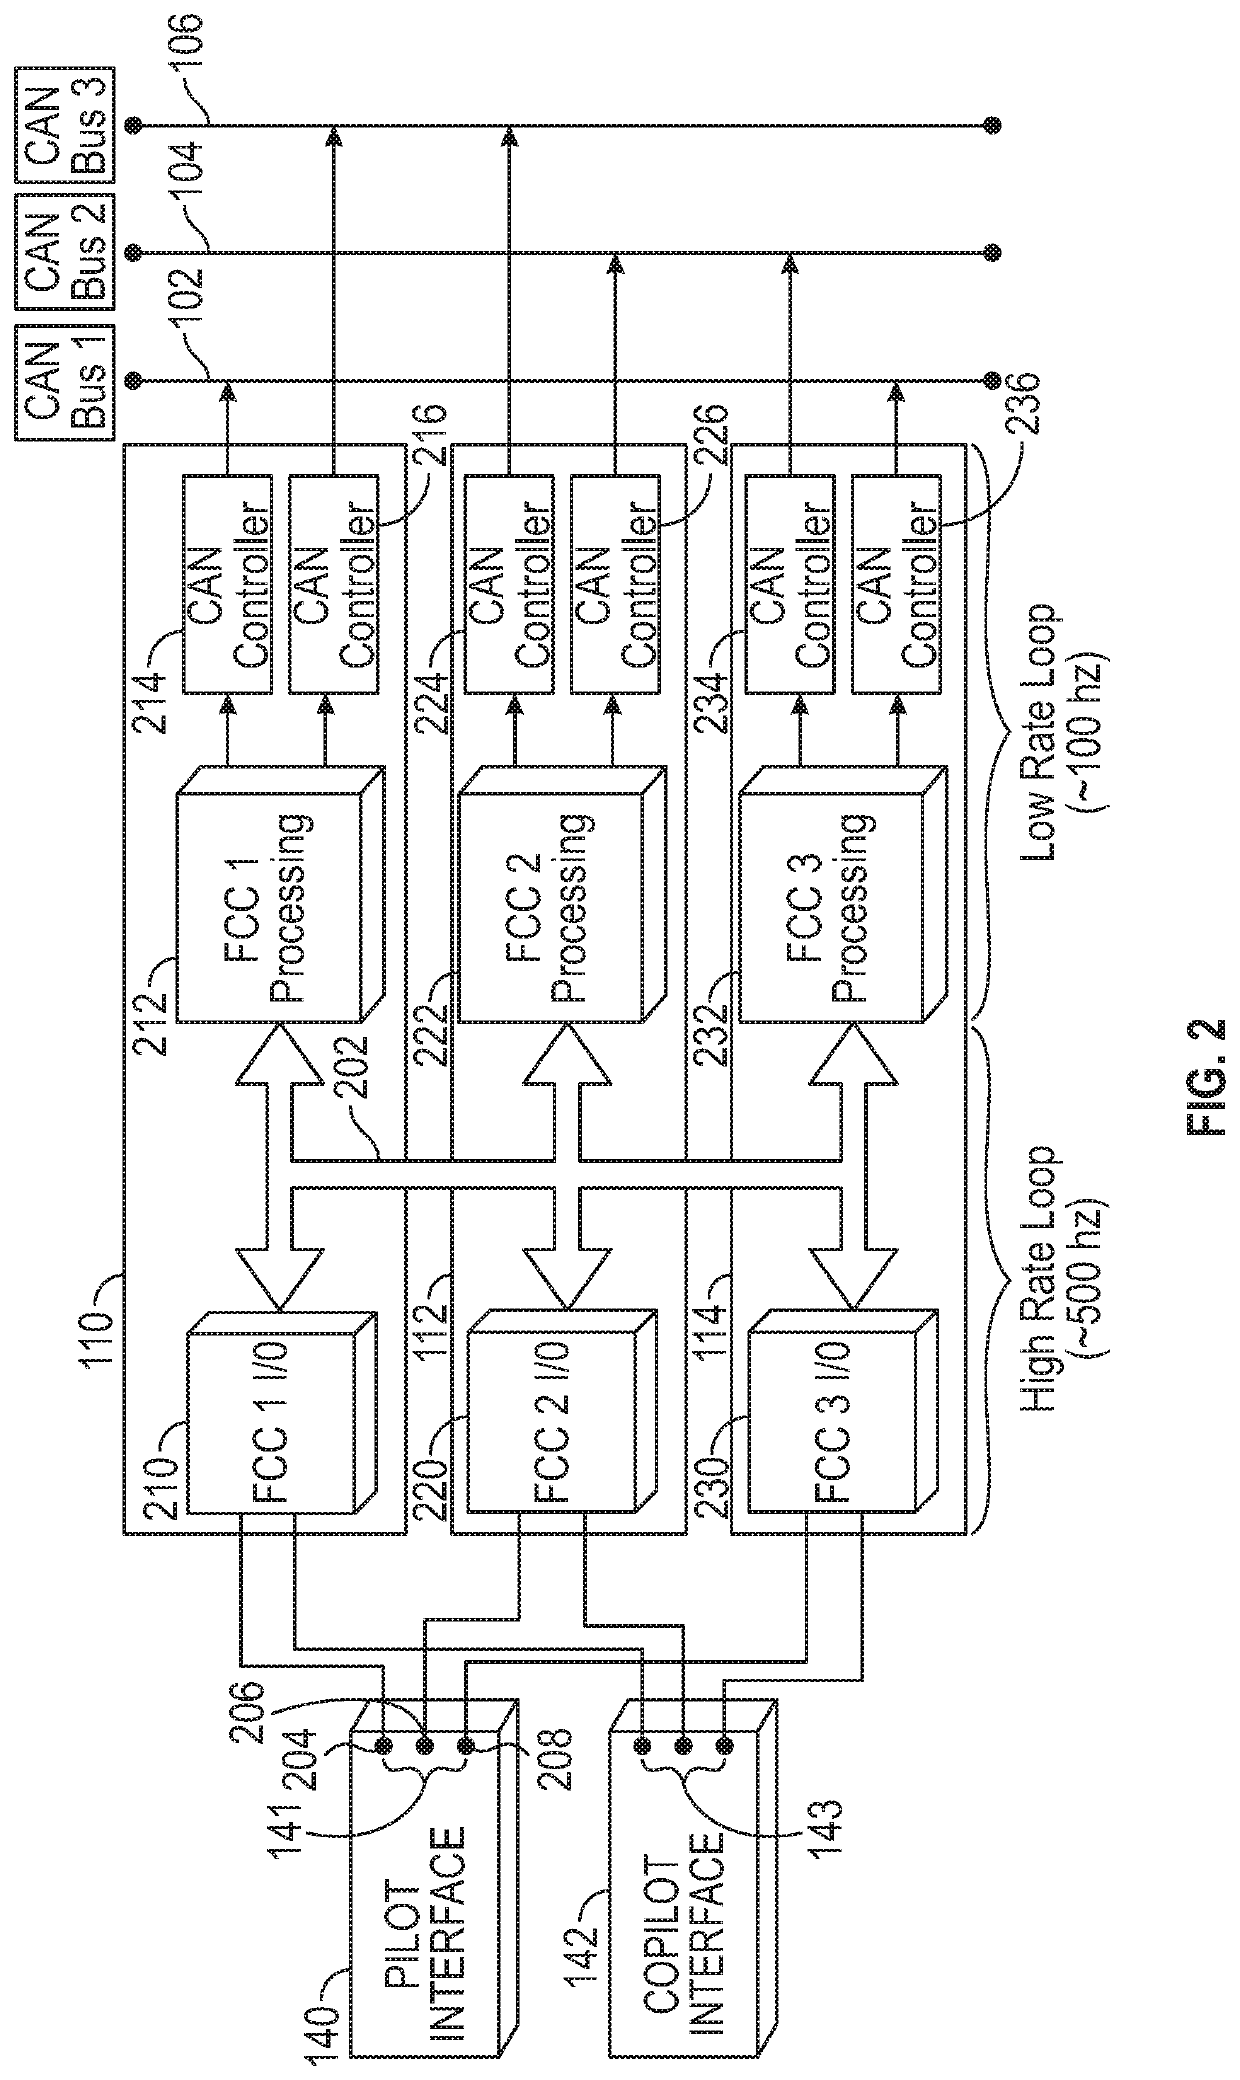 Fly-by-wire systems and related operating methods